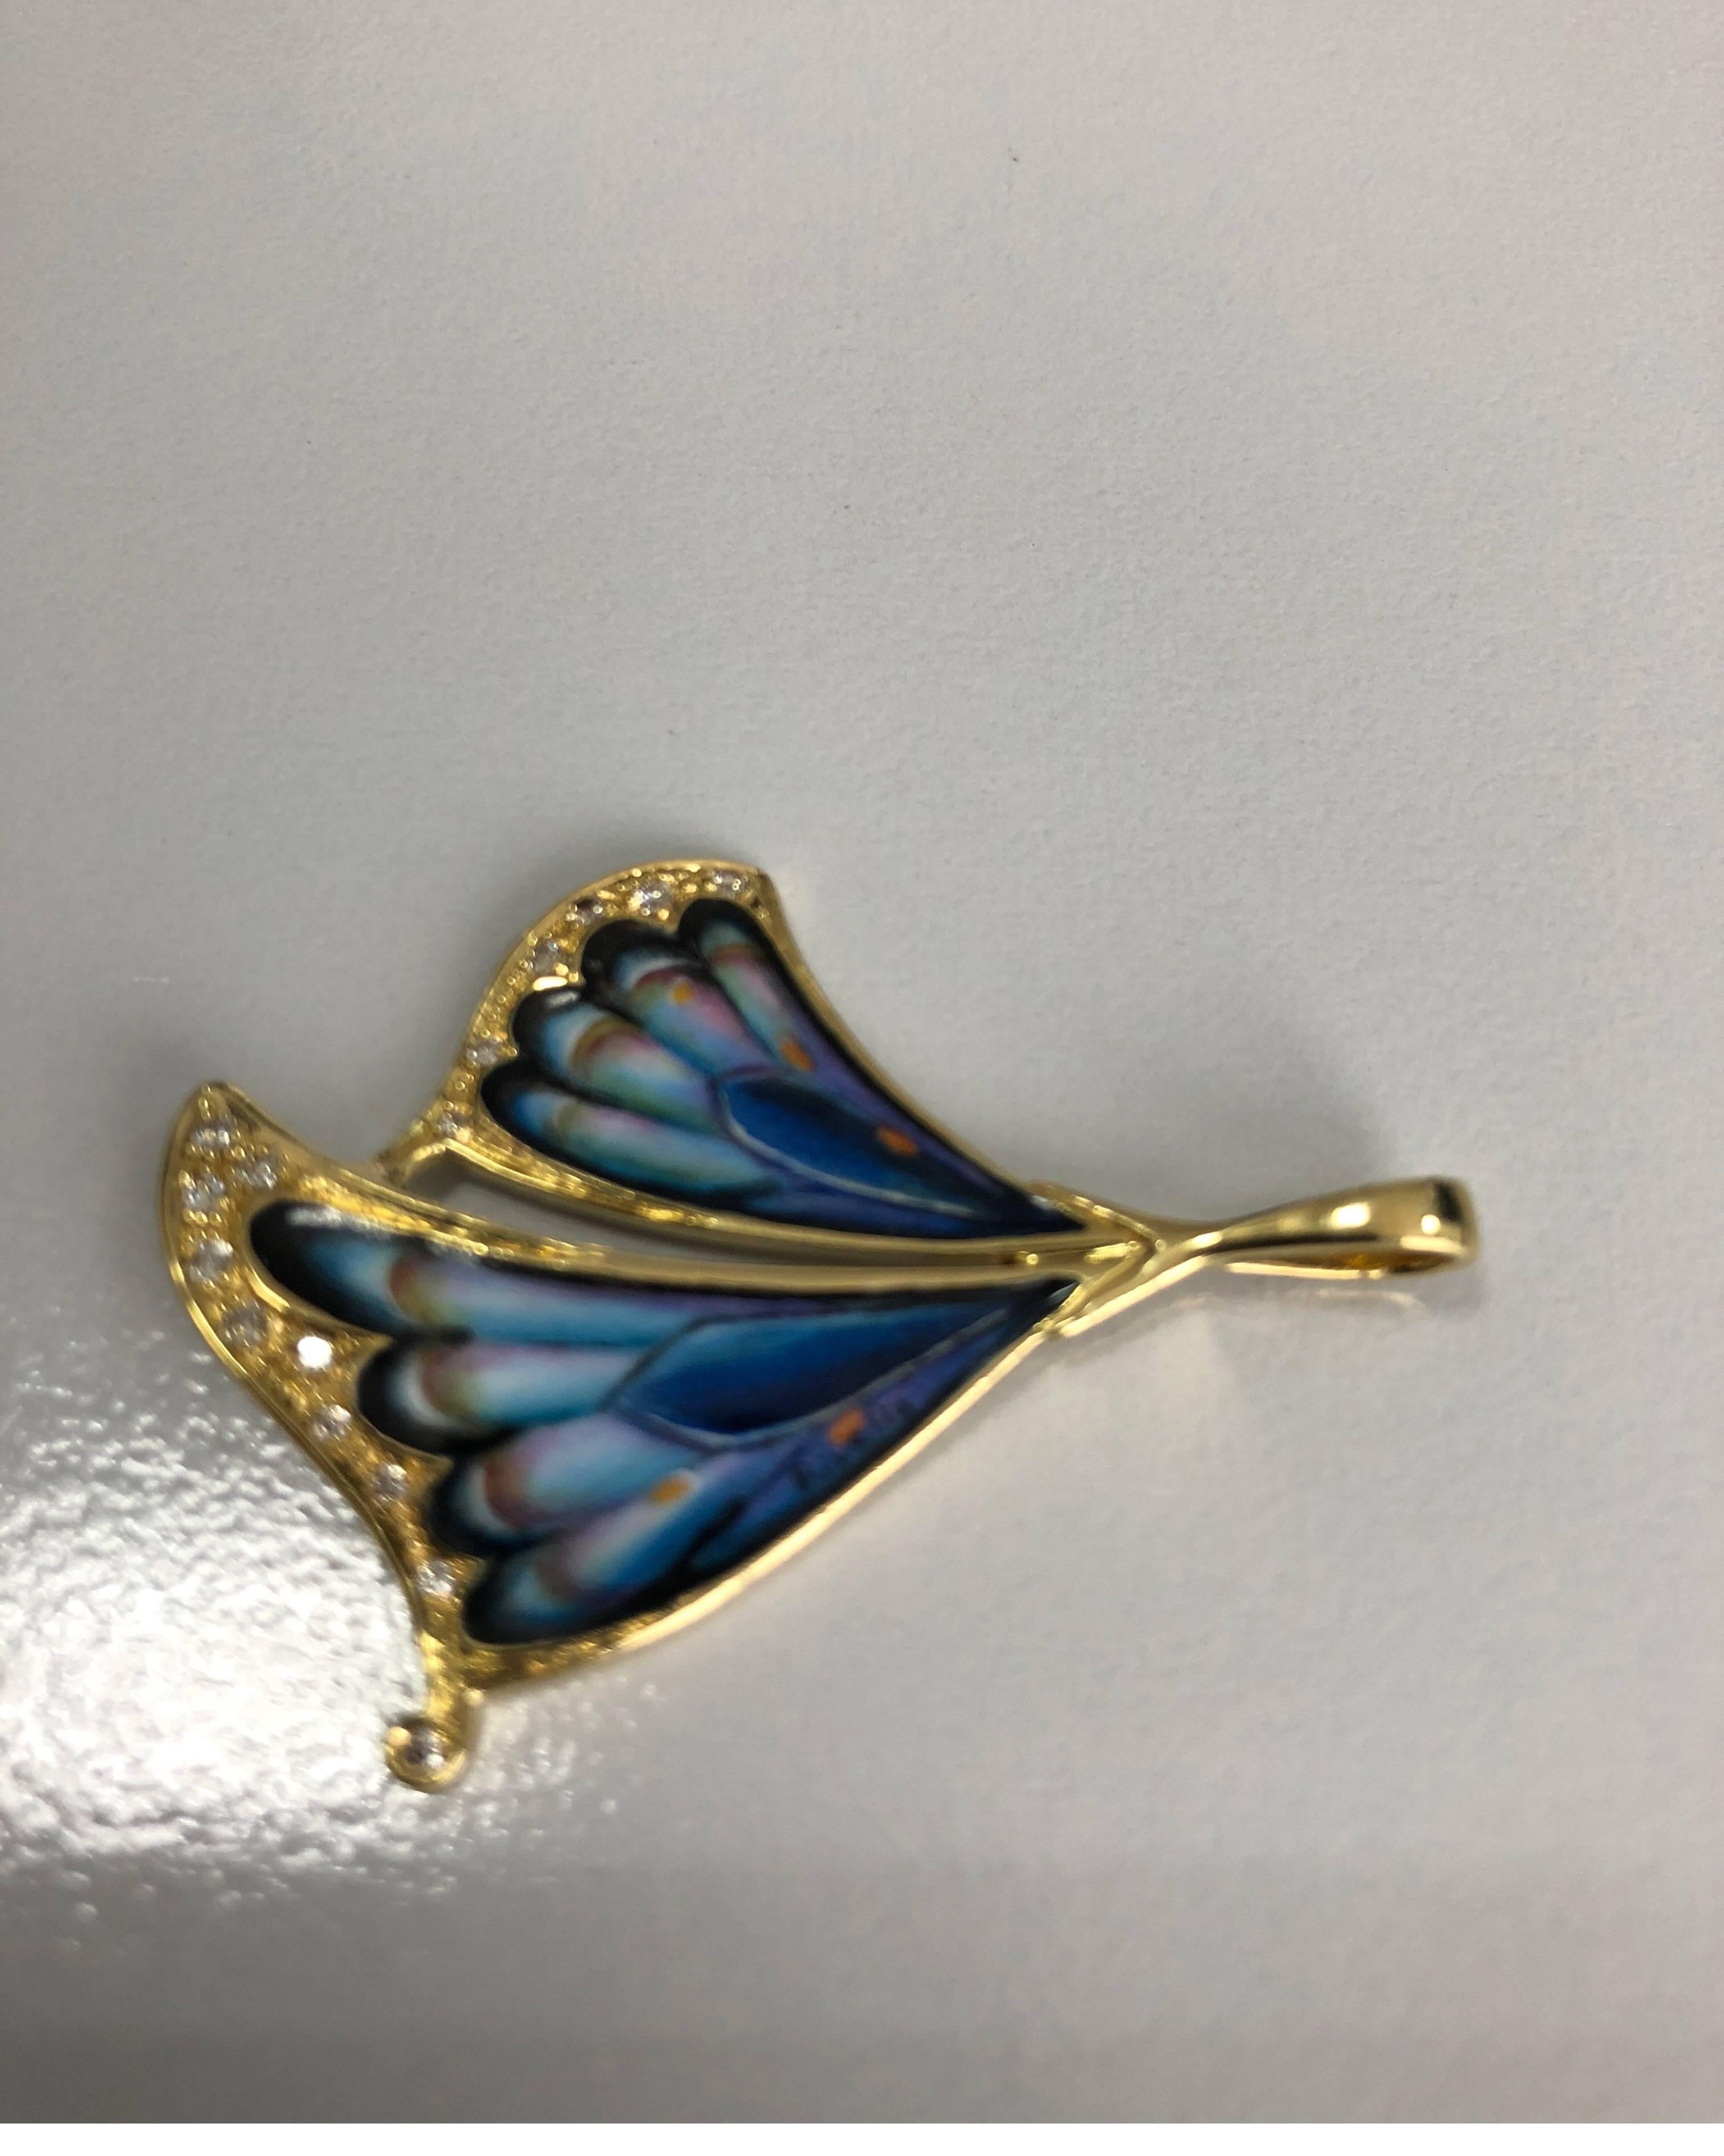 Pendant blue enameled  wings in yellow gold 18 kt and white diamonds
total gold weight gr 9
total diamond ct 0,15
STAMP 10MI 750